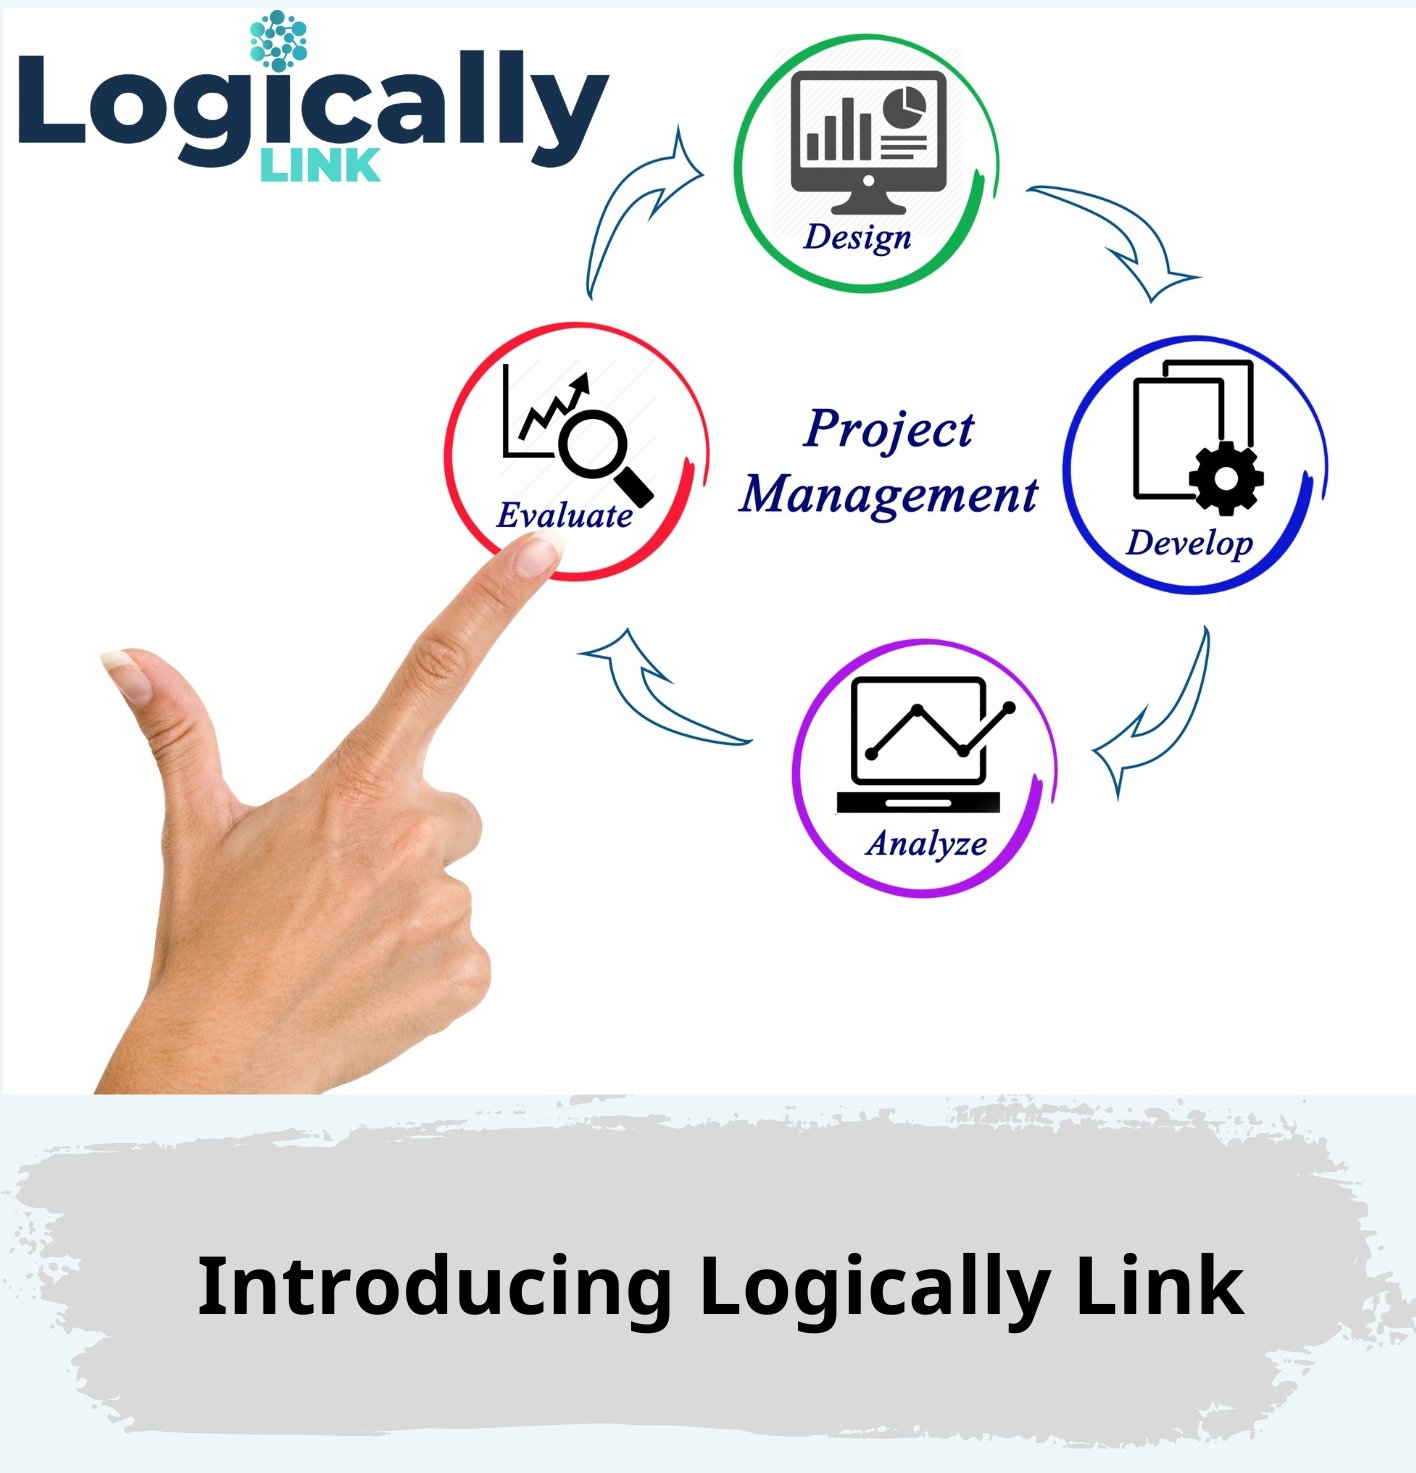 Introducing Logically Link